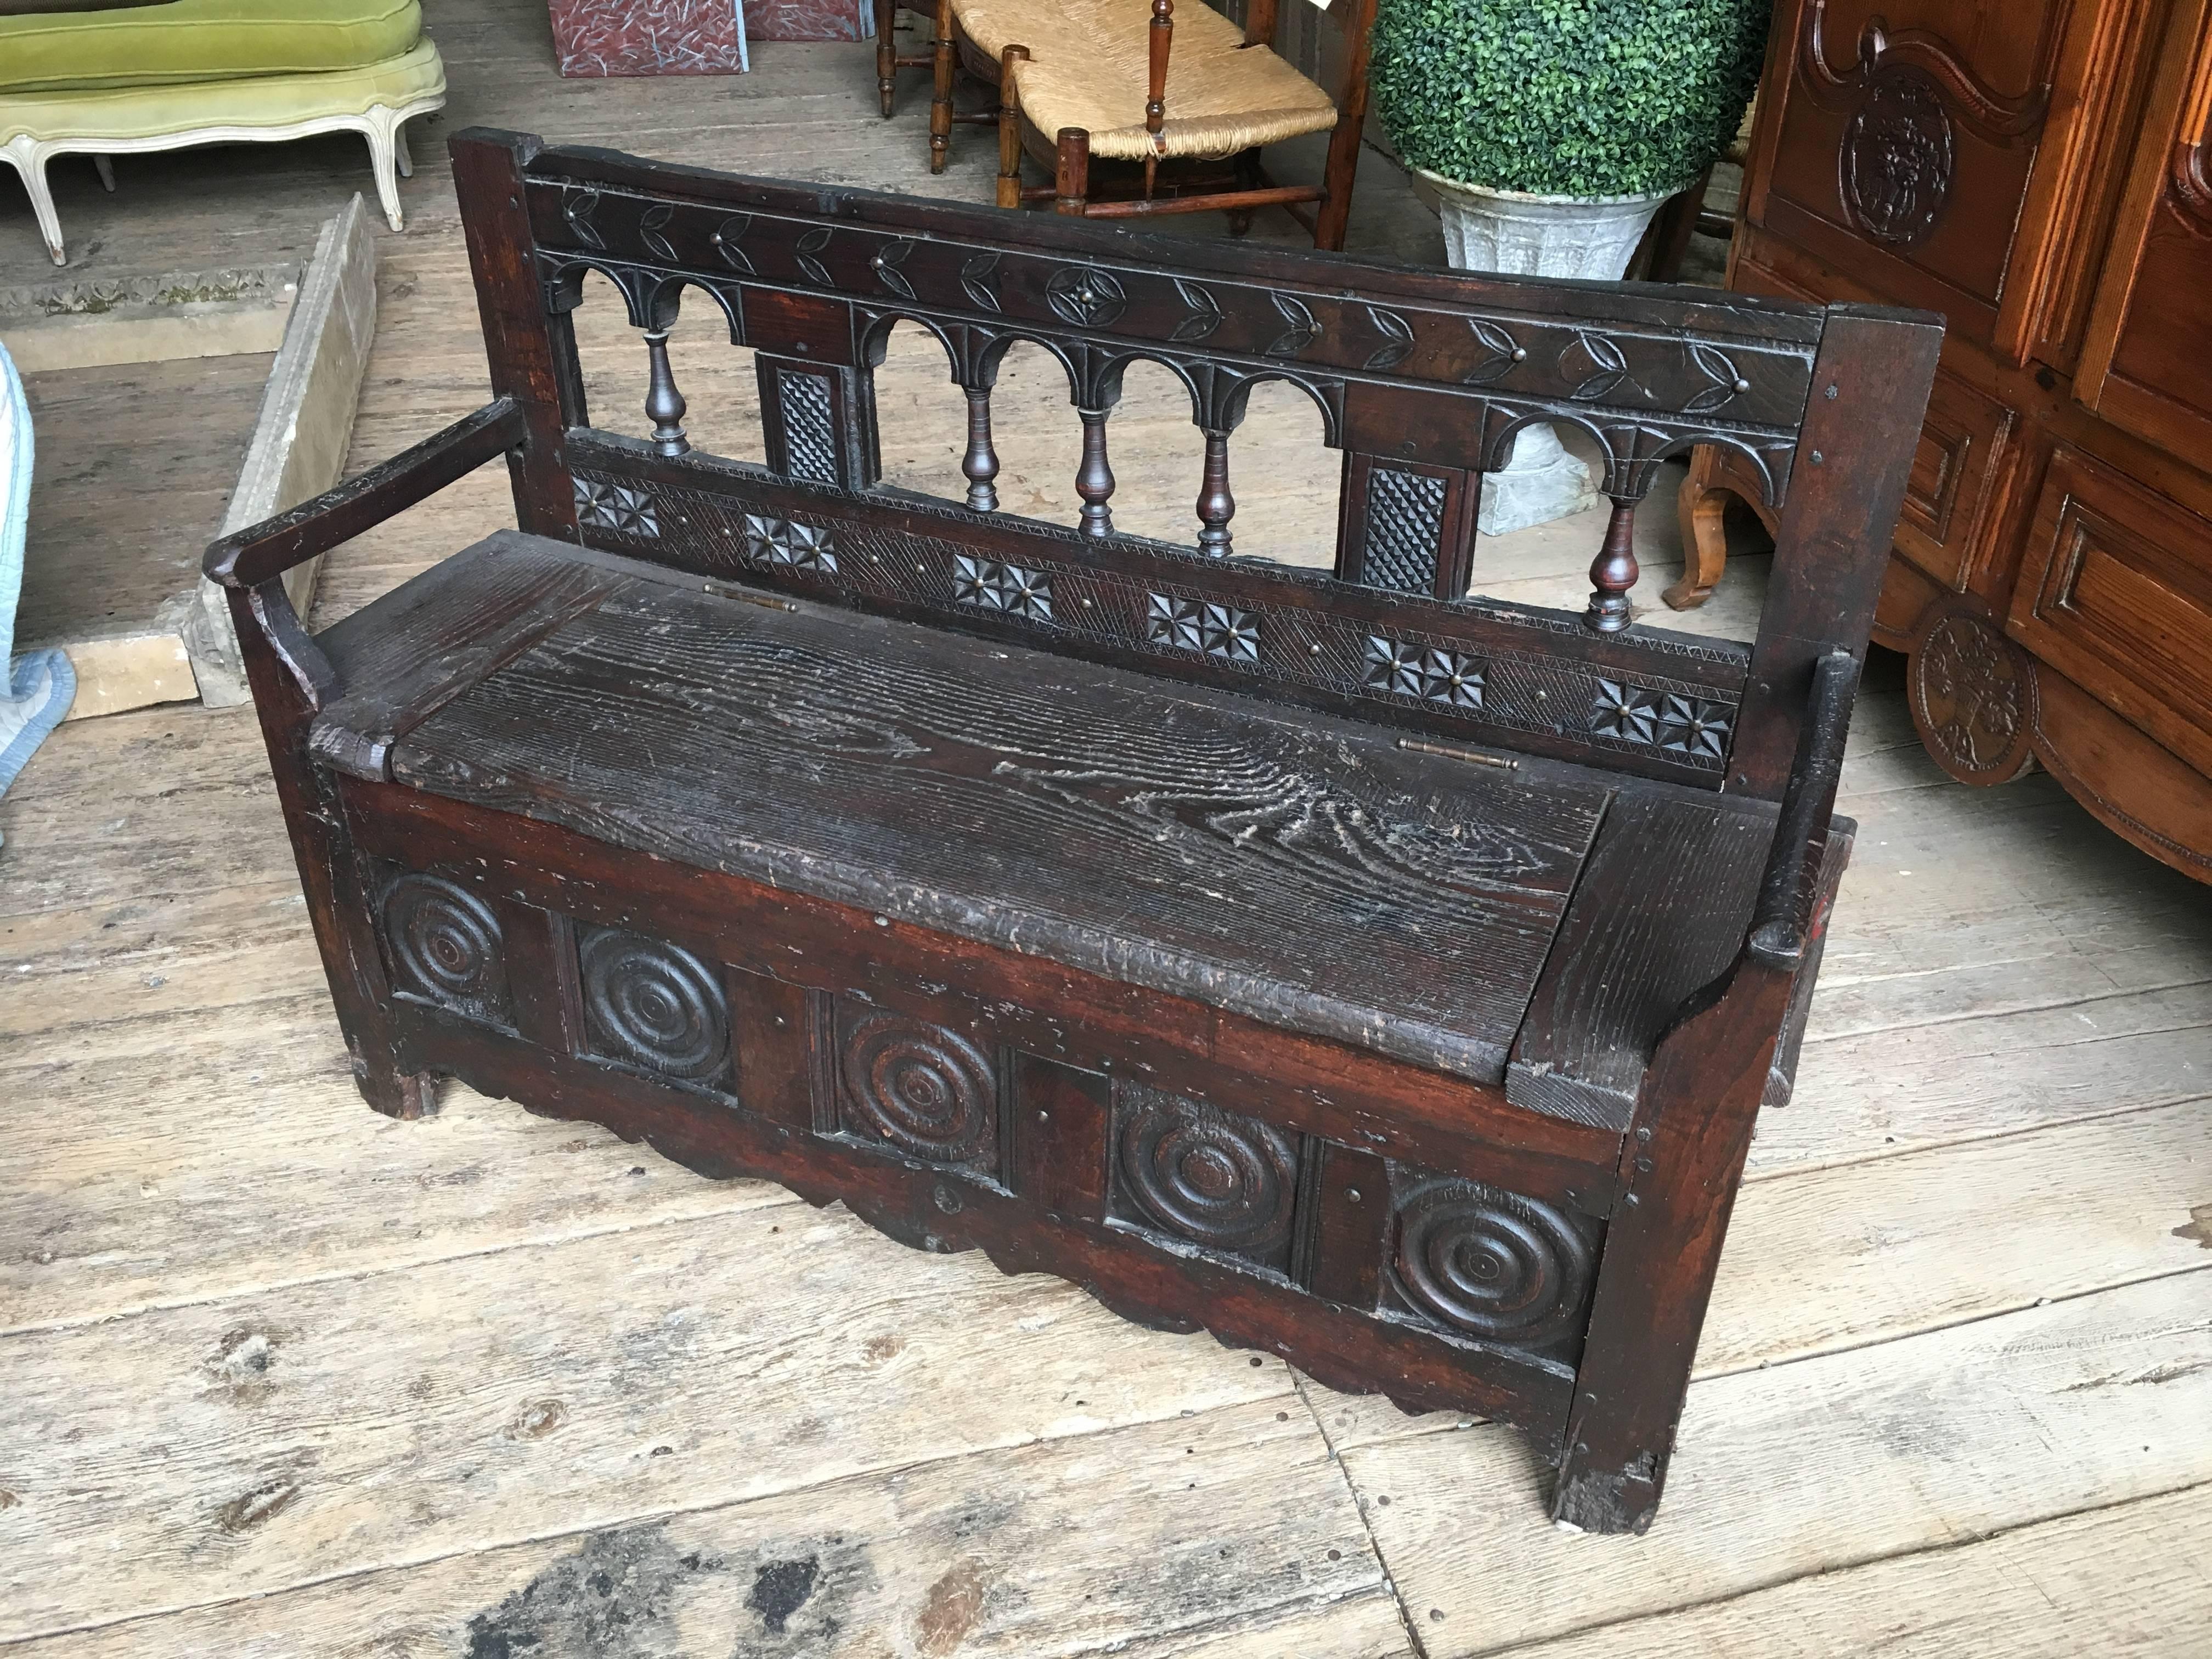 A rustic 19th century storage bench in dark oak from Brittany France. The back is decorated with a carved top rail with arches and turned balusters. The seat lifts to a storage compartment with arms on both sides. The base is scalloped with circular